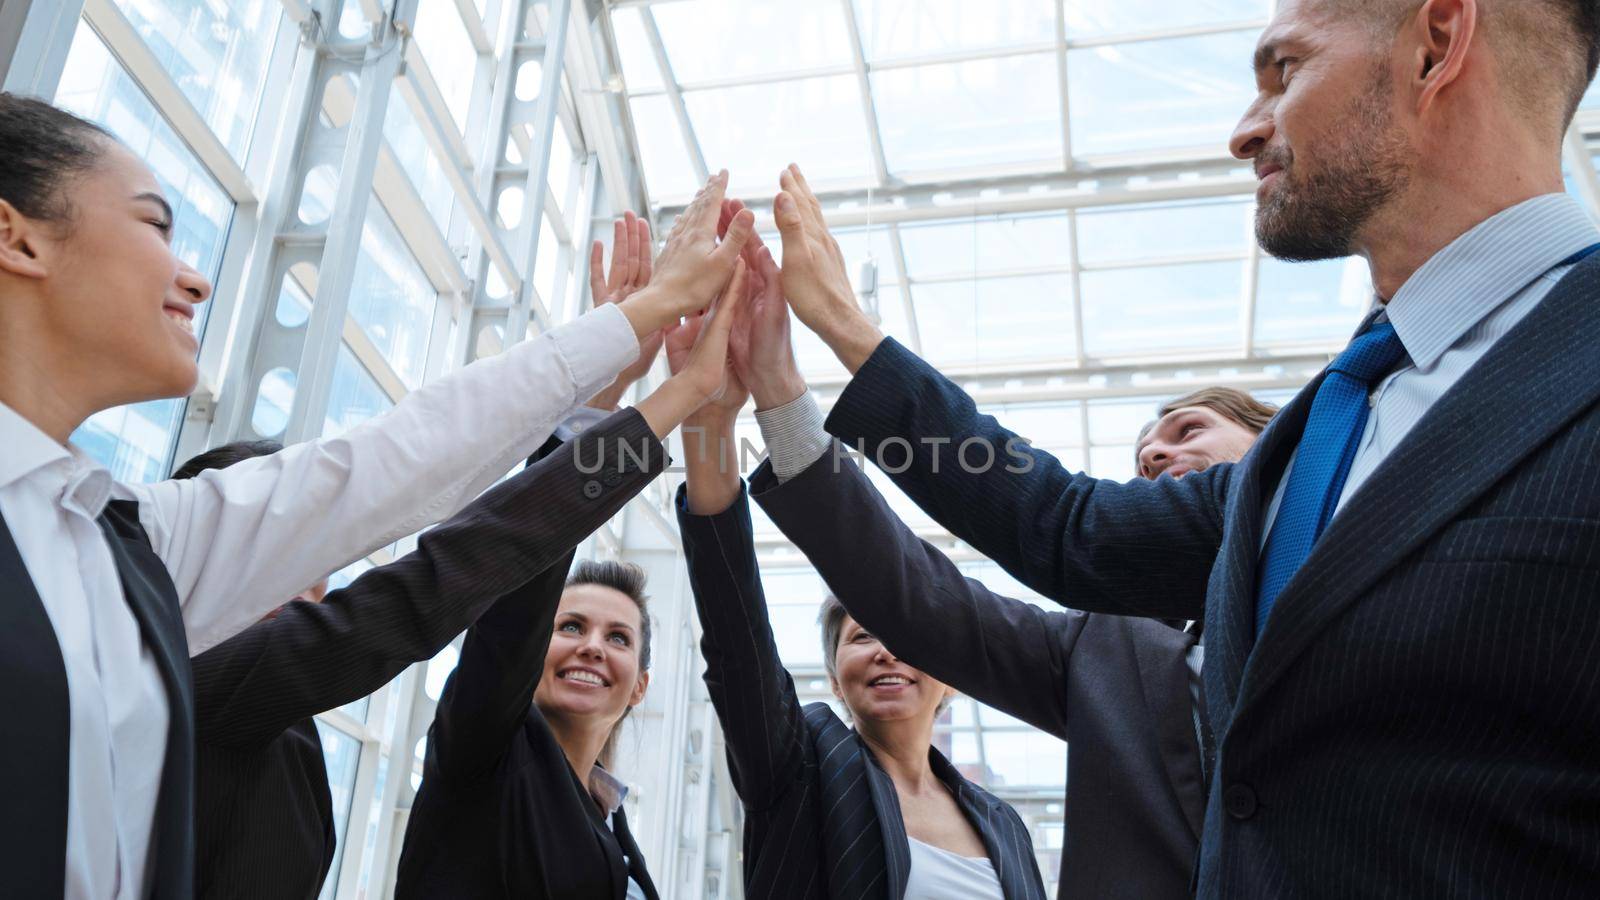 Happy successful multiracial business team giving a high fives gesture as they laugh and cheer their success